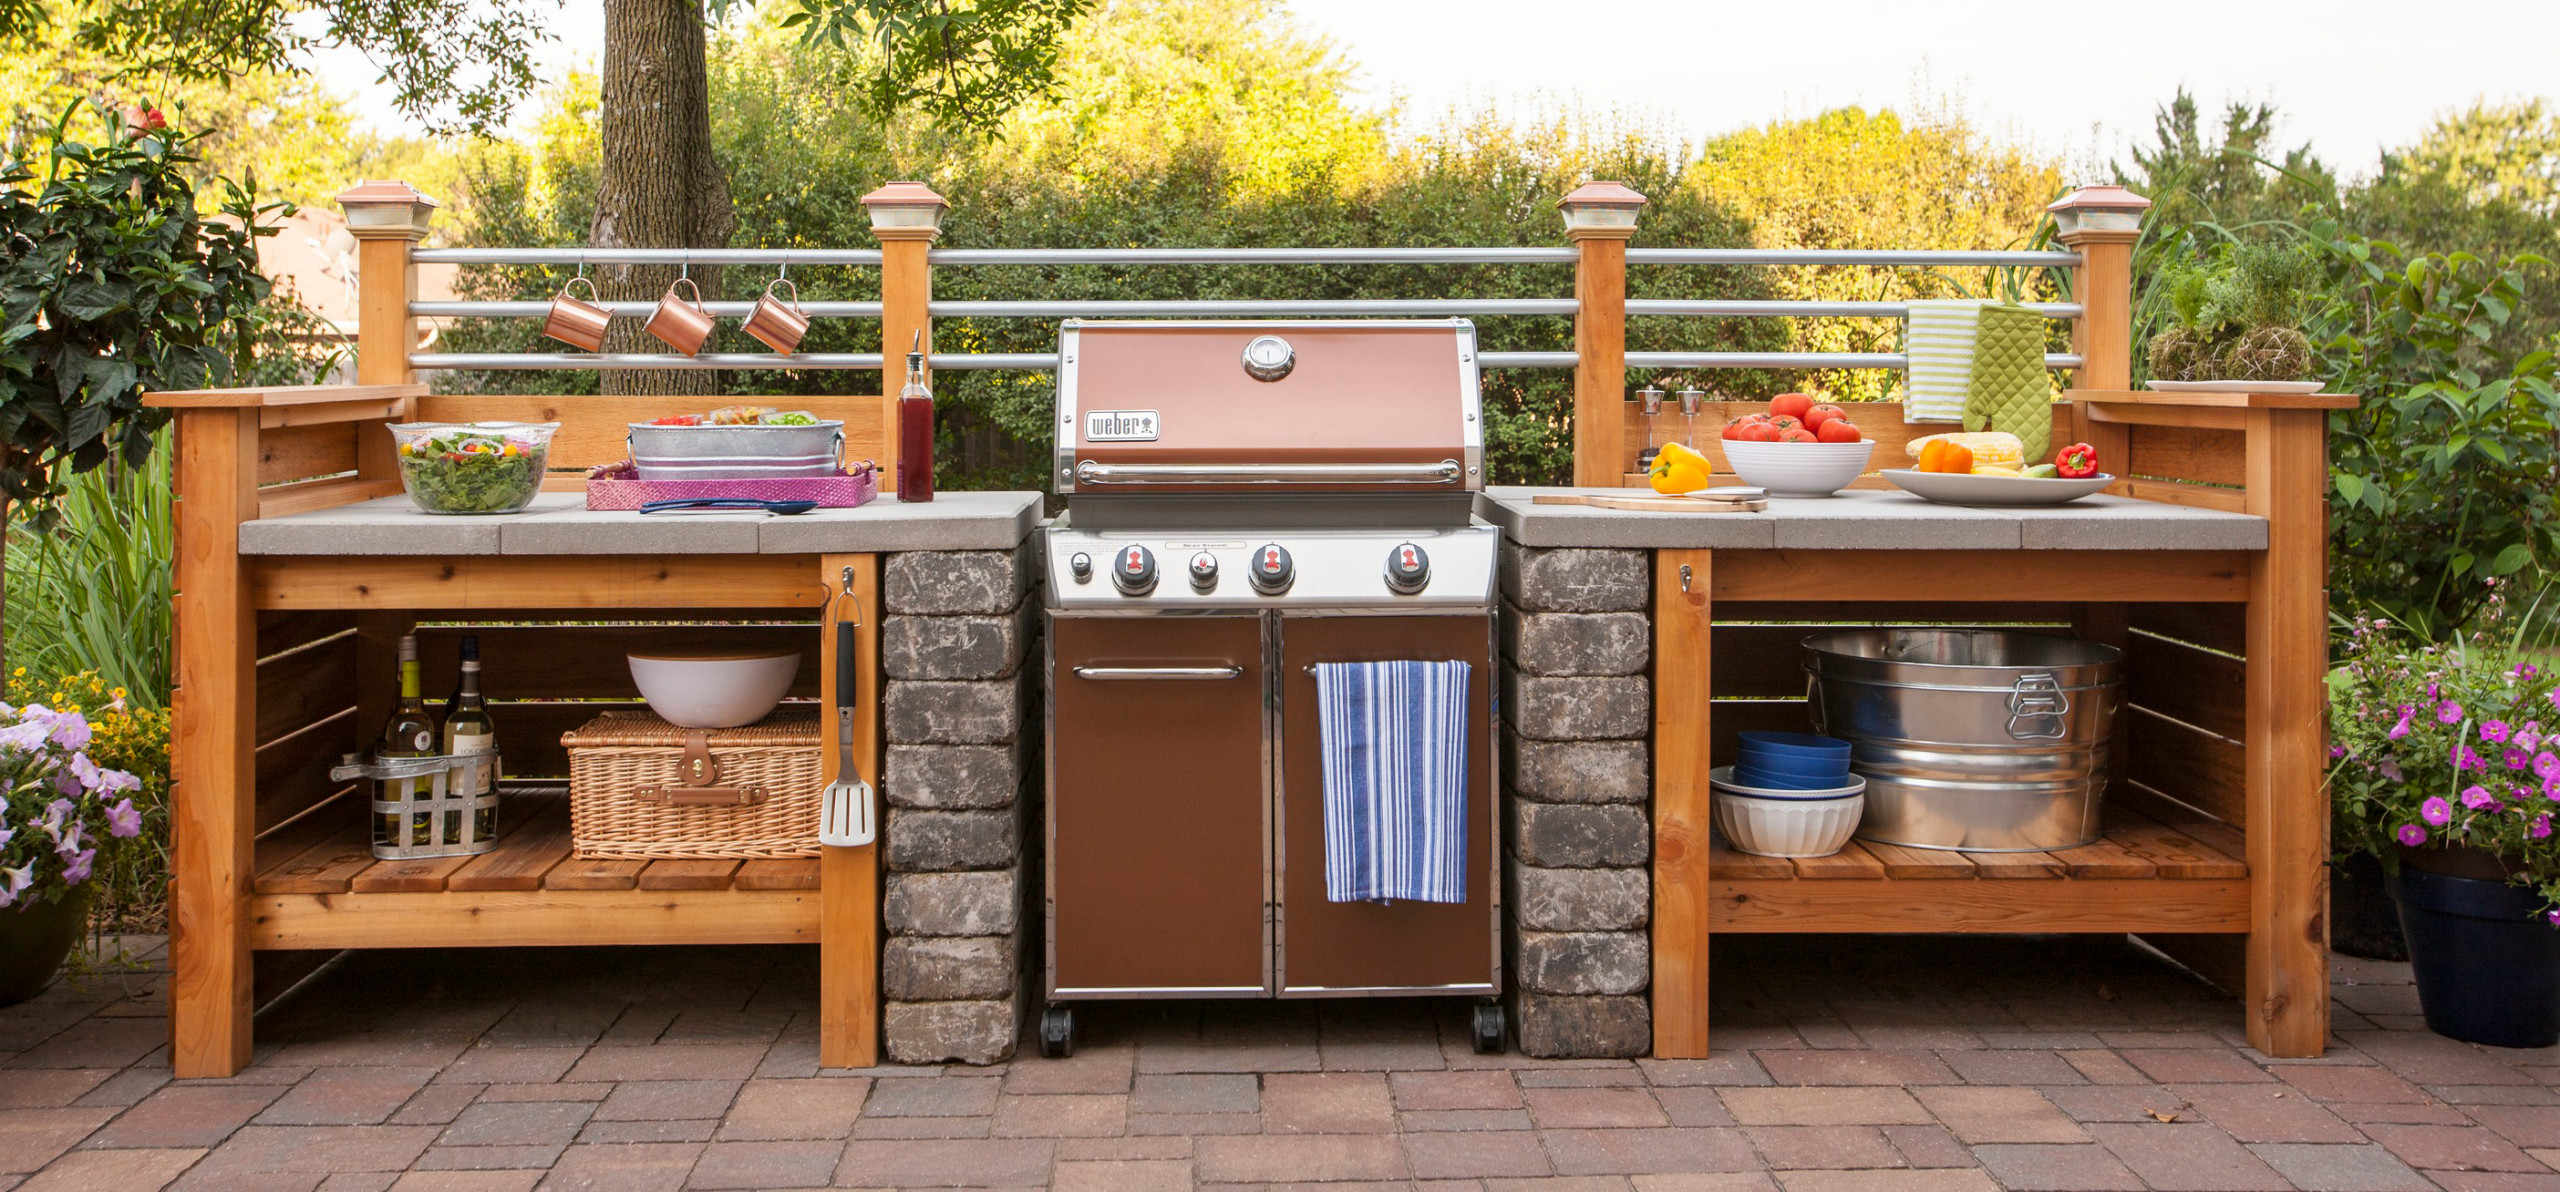 75 Beautiful Small Outdoor Kitchen Design Houzz Pictures Ideas February